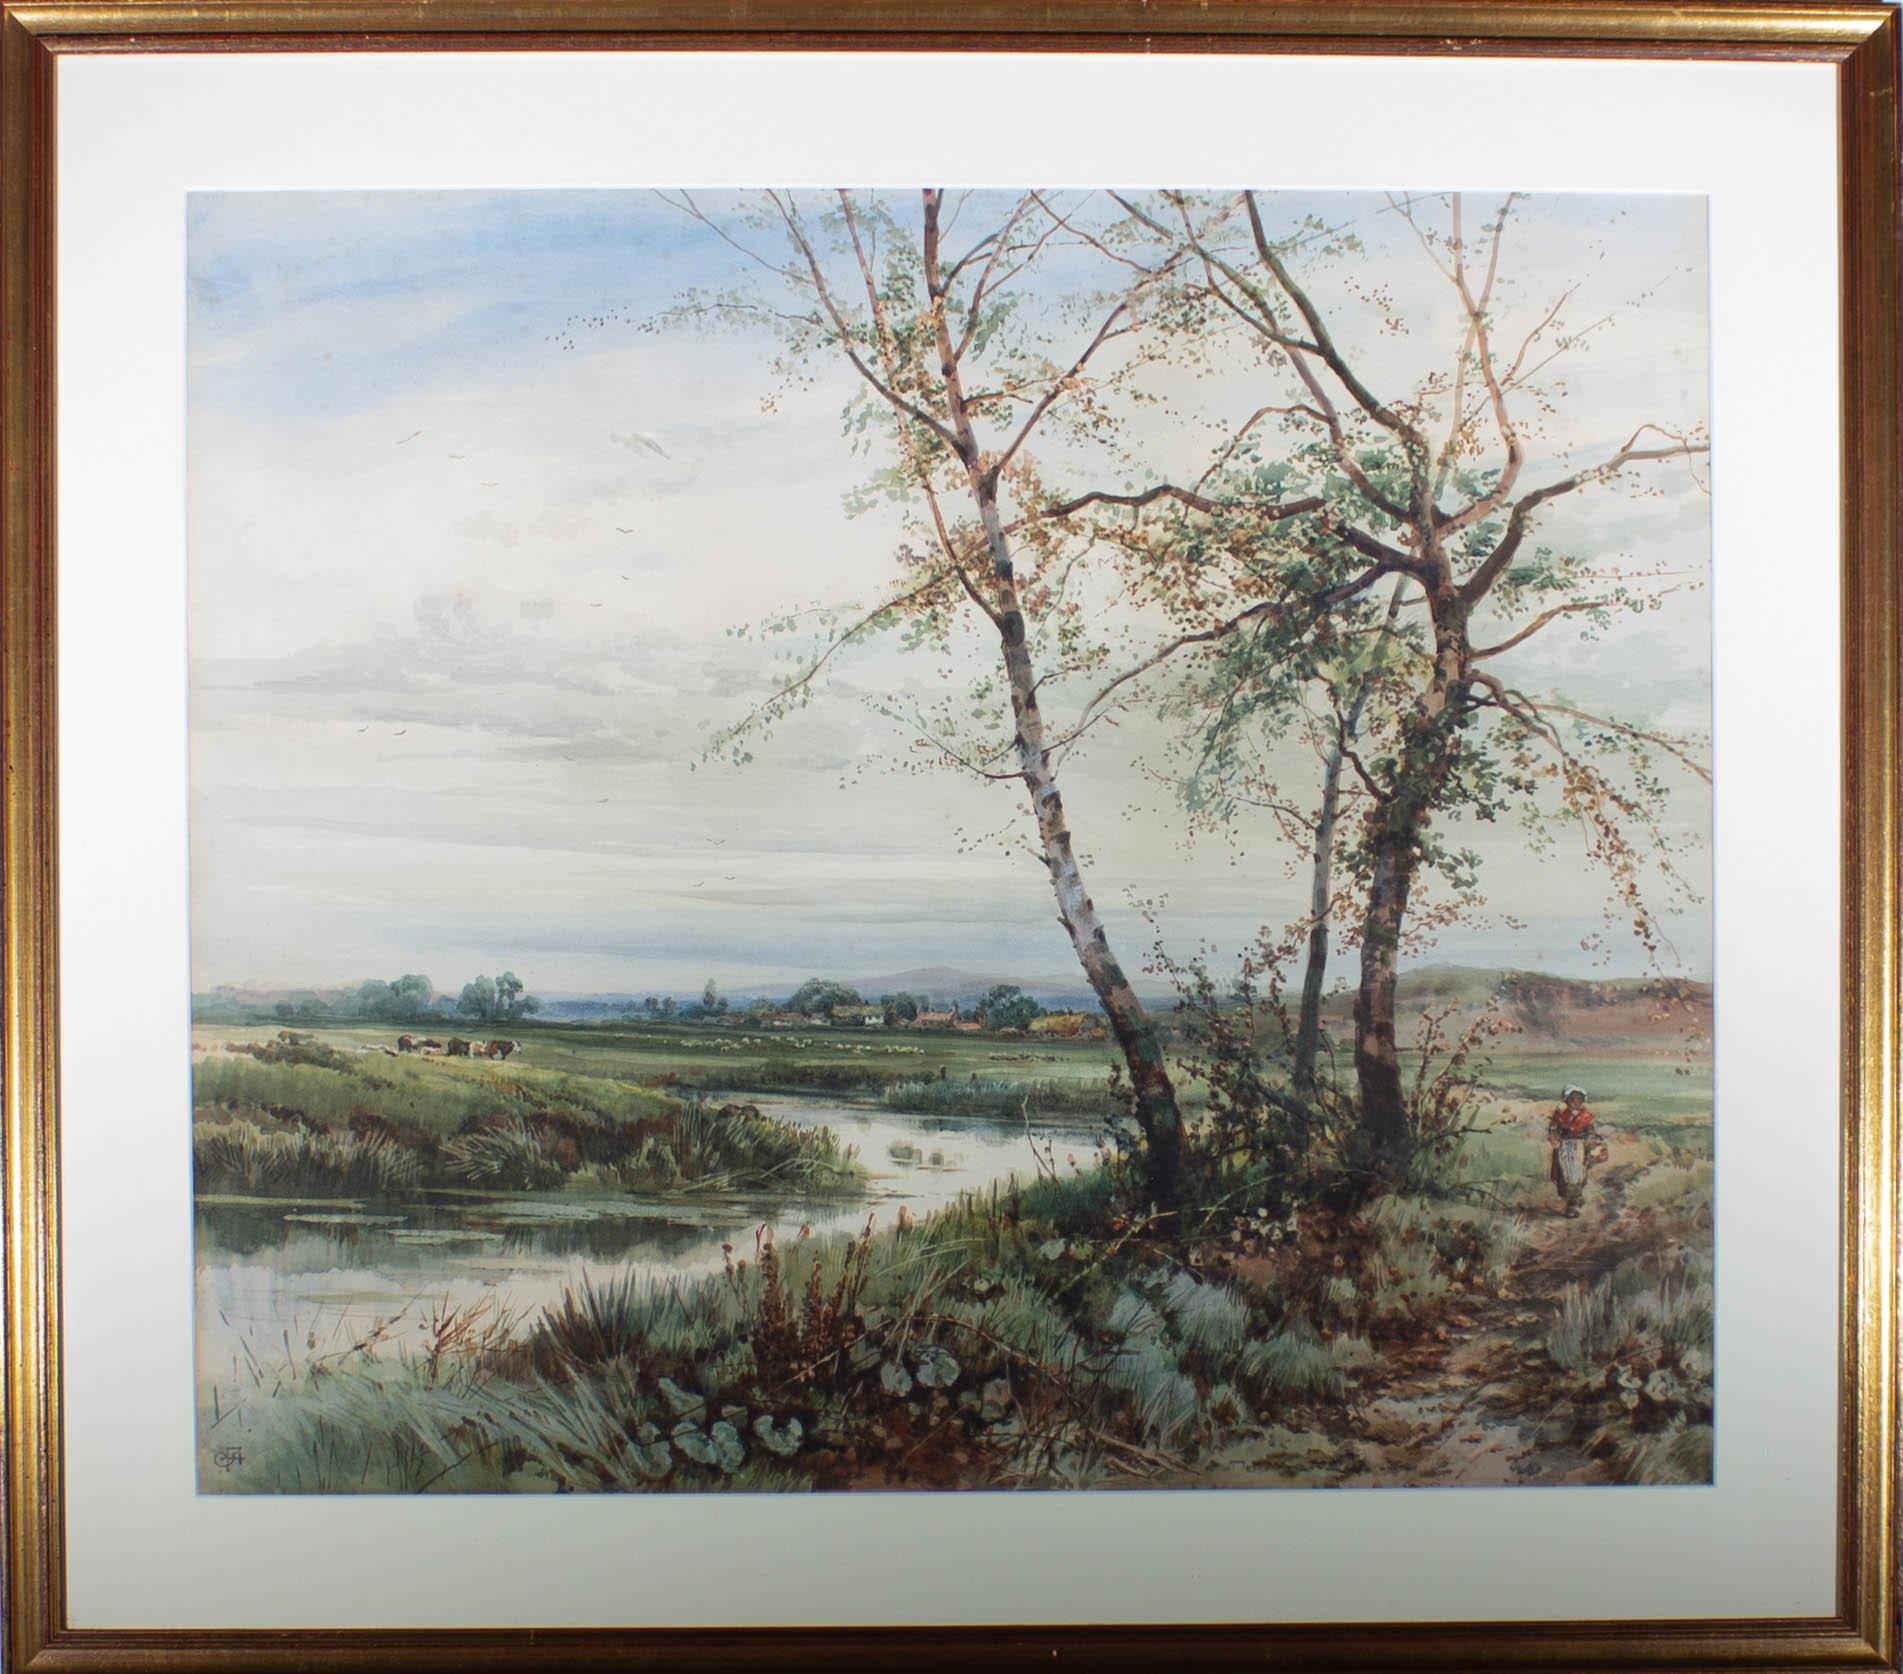 Unknown Landscape Art - Early 20th Century Watercolour - Following The Meandering River